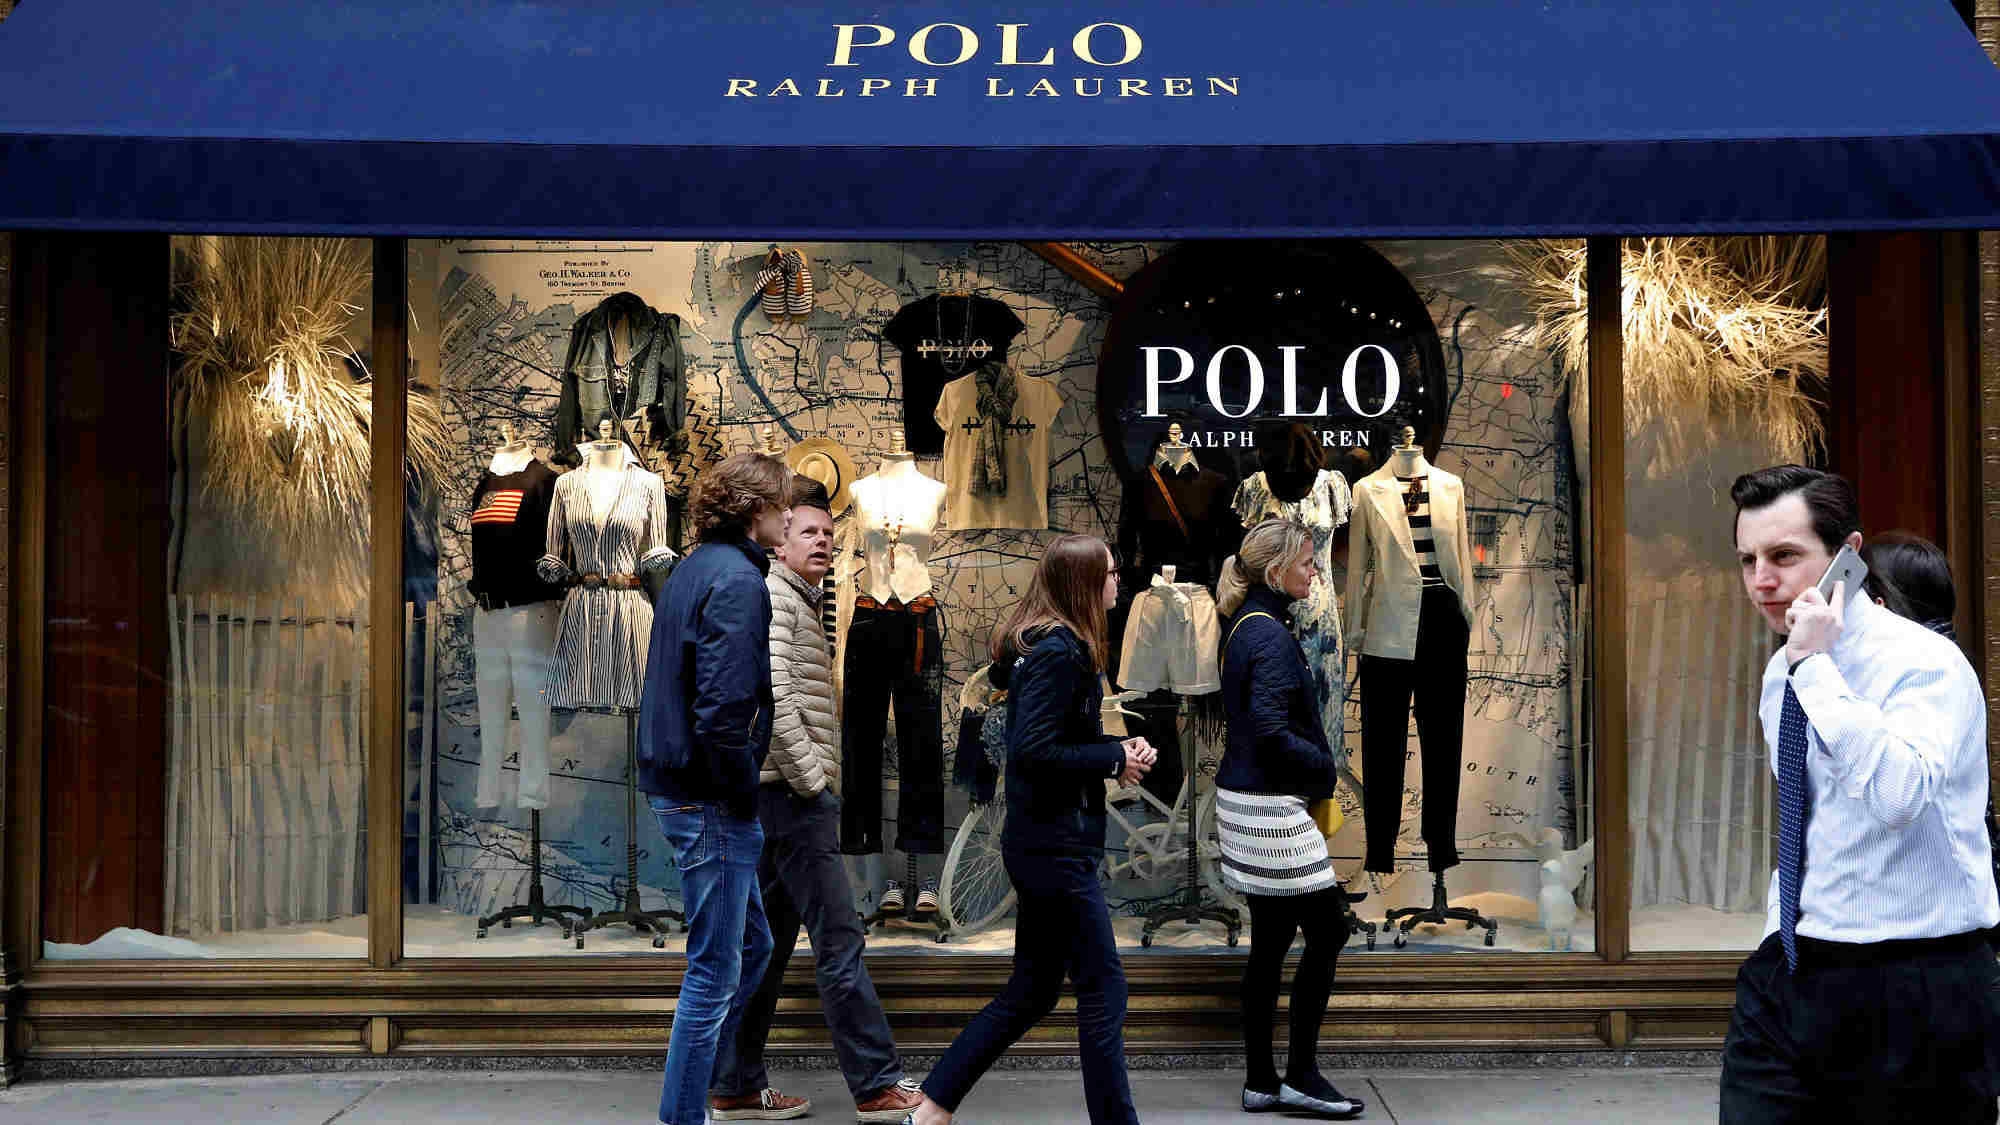 Ralph Lauren to close flagship NYC Polo store, dozens of other locations